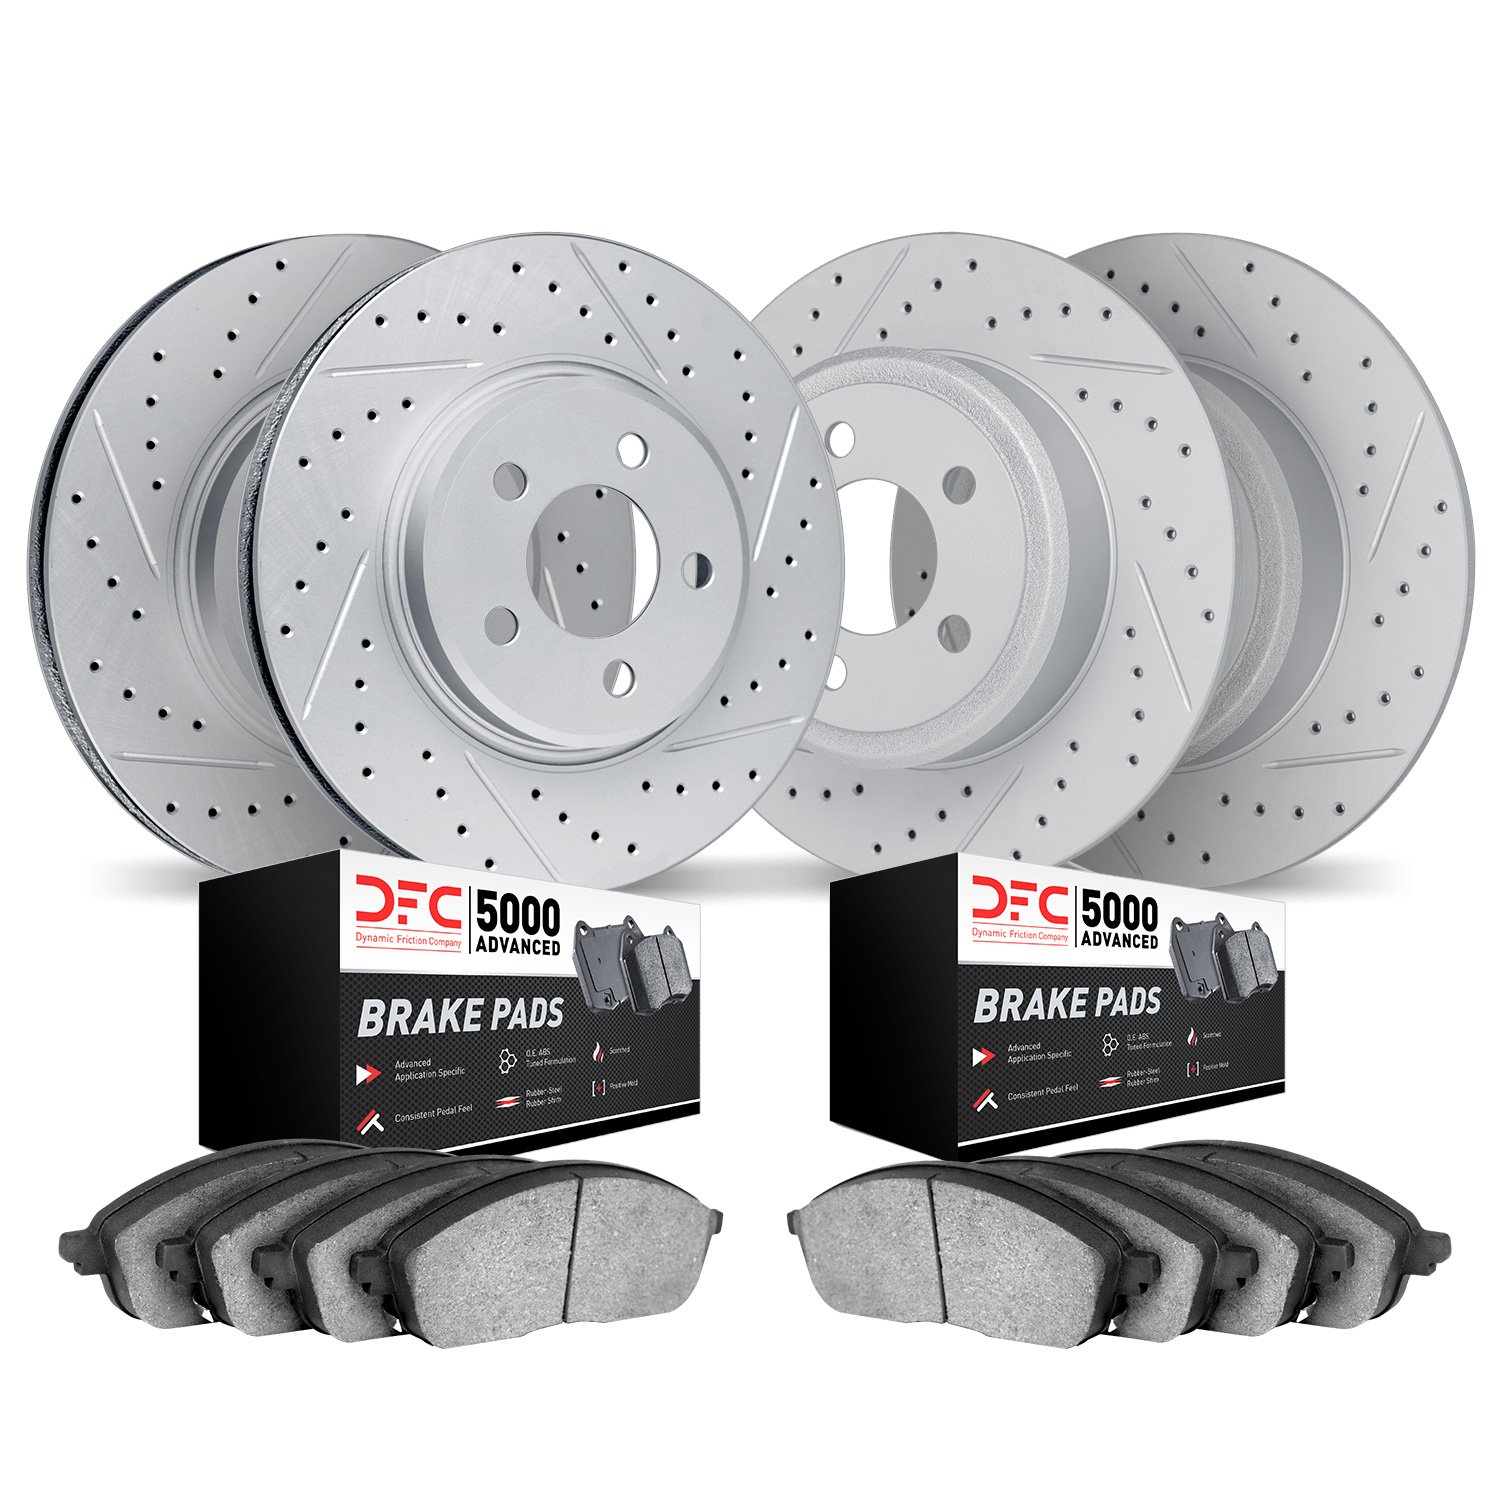 2504-40085 Geoperformance Drilled/Slotted Rotors w/5000 Advanced Brake Pads Kit, 2002-2006 Multiple Makes/Models, Position: Fron